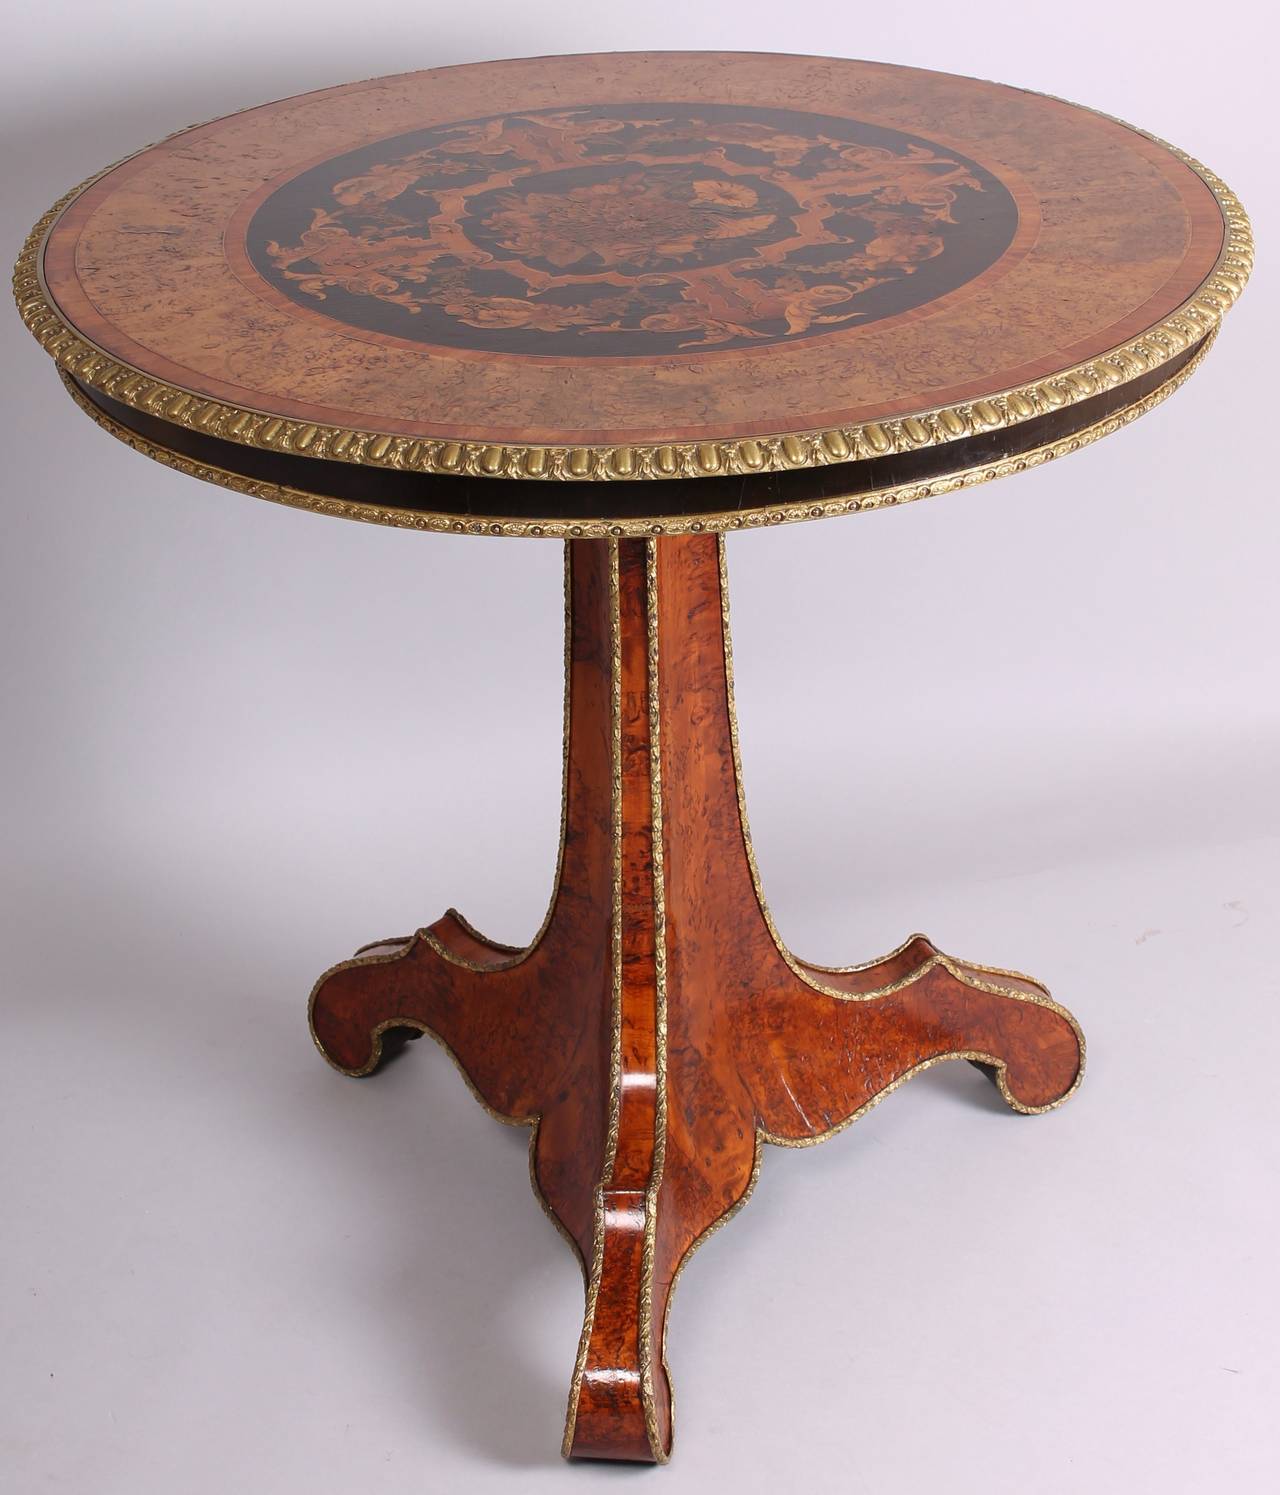 Exceptionally fine mid nineteenth century burr wood and marquetry centre-table of the character and quality of furniture supplied by Edward Holmes Baldock (1777-1845); the circular top with a finely cast and chased ormolu edge, surrounding a broad